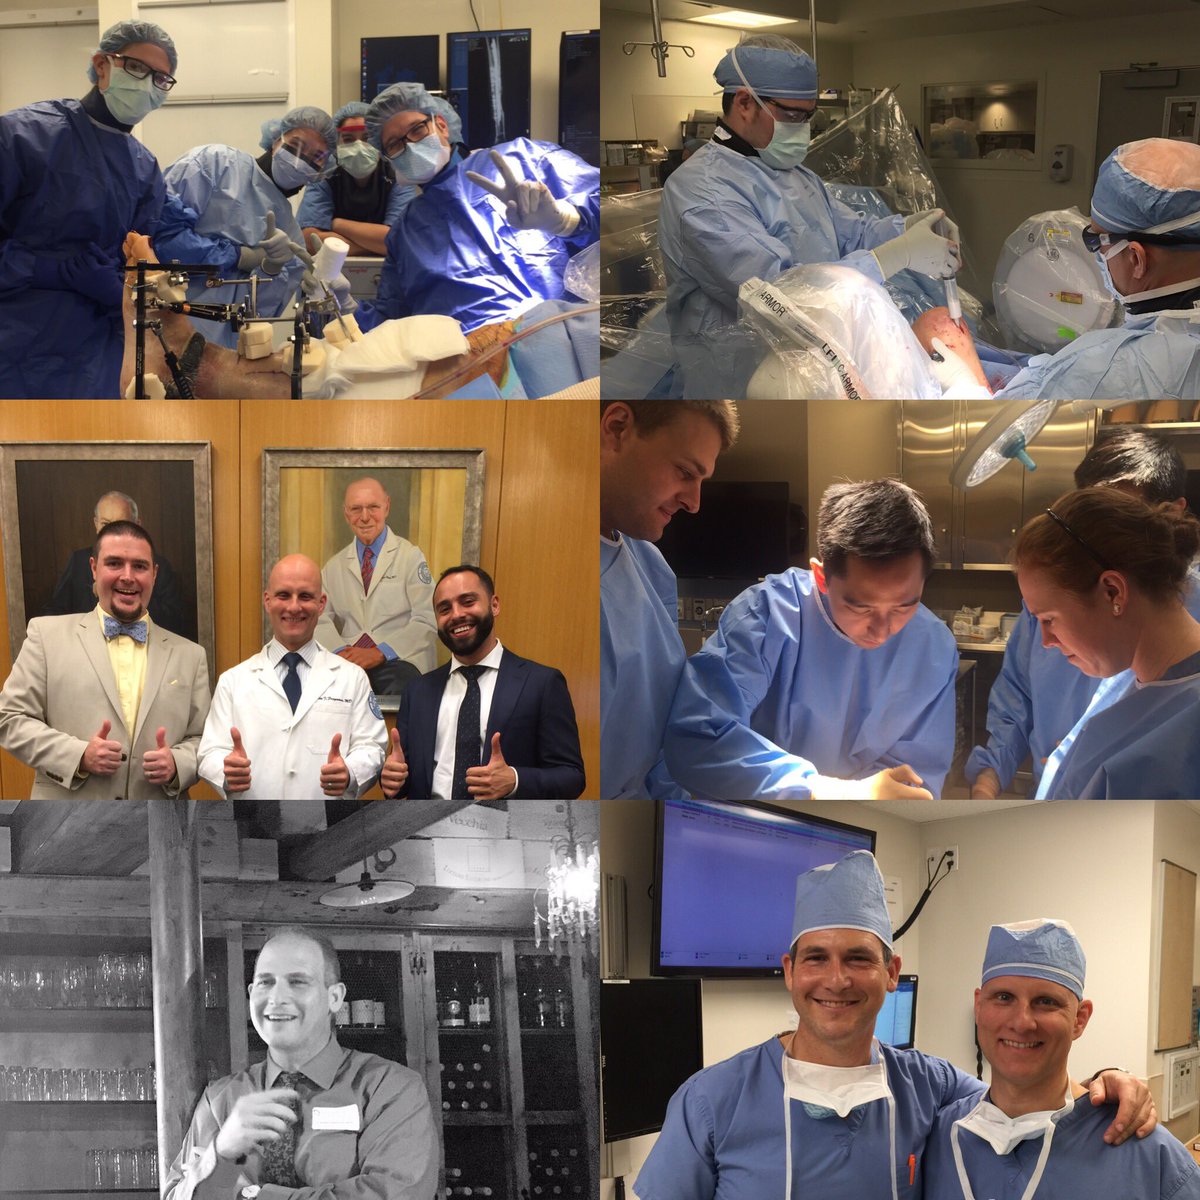 We are very grateful for the opportunity to work with and train outstanding surgeons @HSpecialSurgery. Happy Thanksgiving!